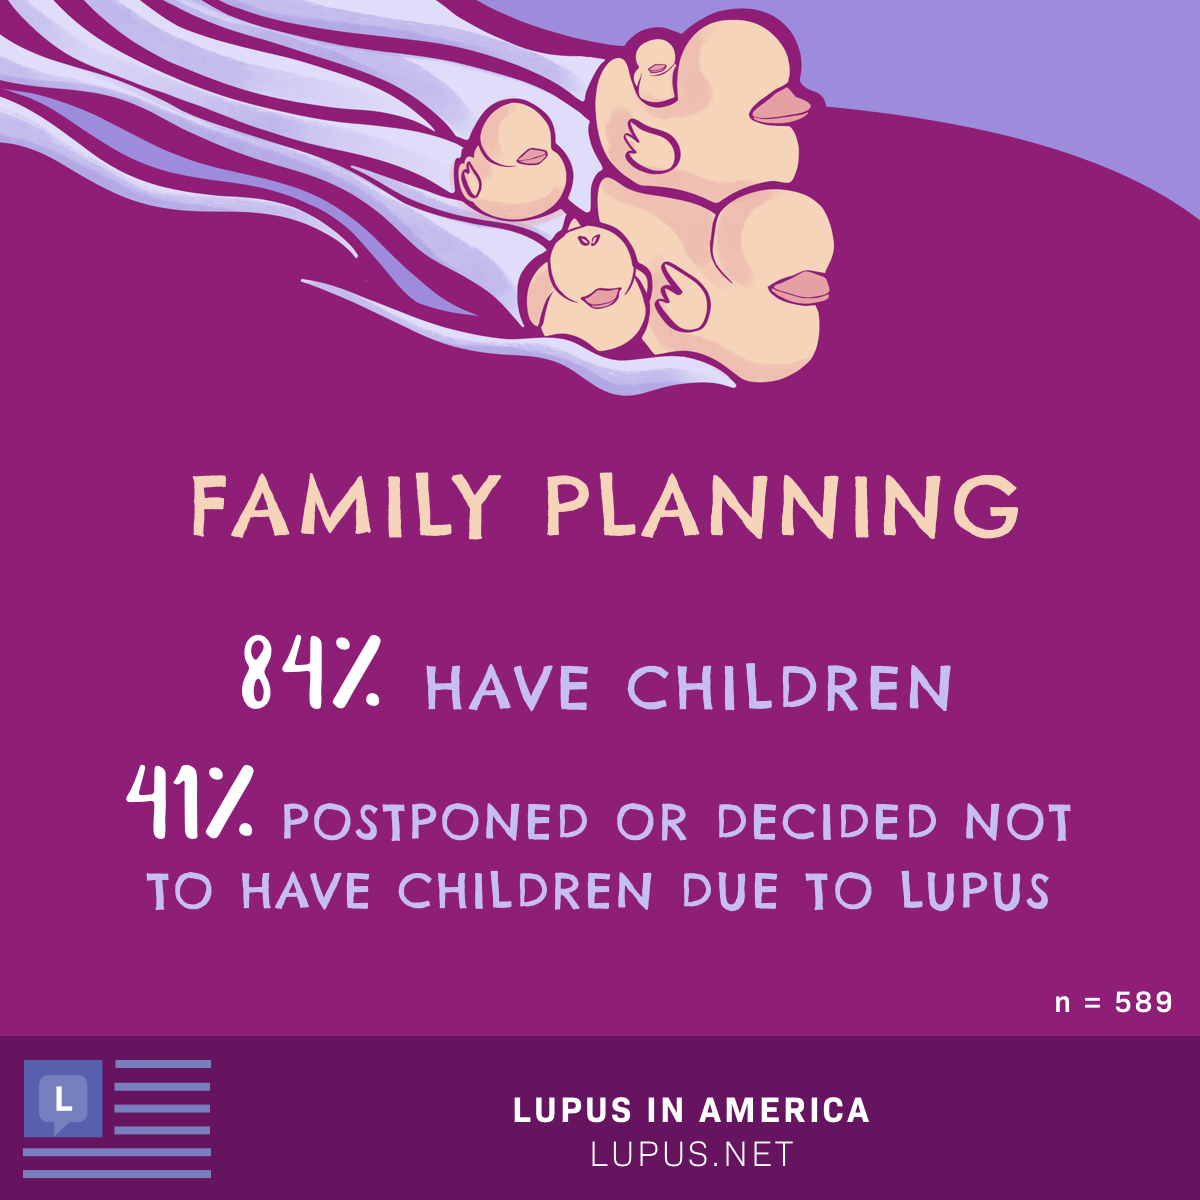 How family planning takes extra care when living with lupus, showing that 84% of people who took the survey have children, and 41% say they postponed or decided not to have children because of lupus. Imagery includes a family of swimming ducks.